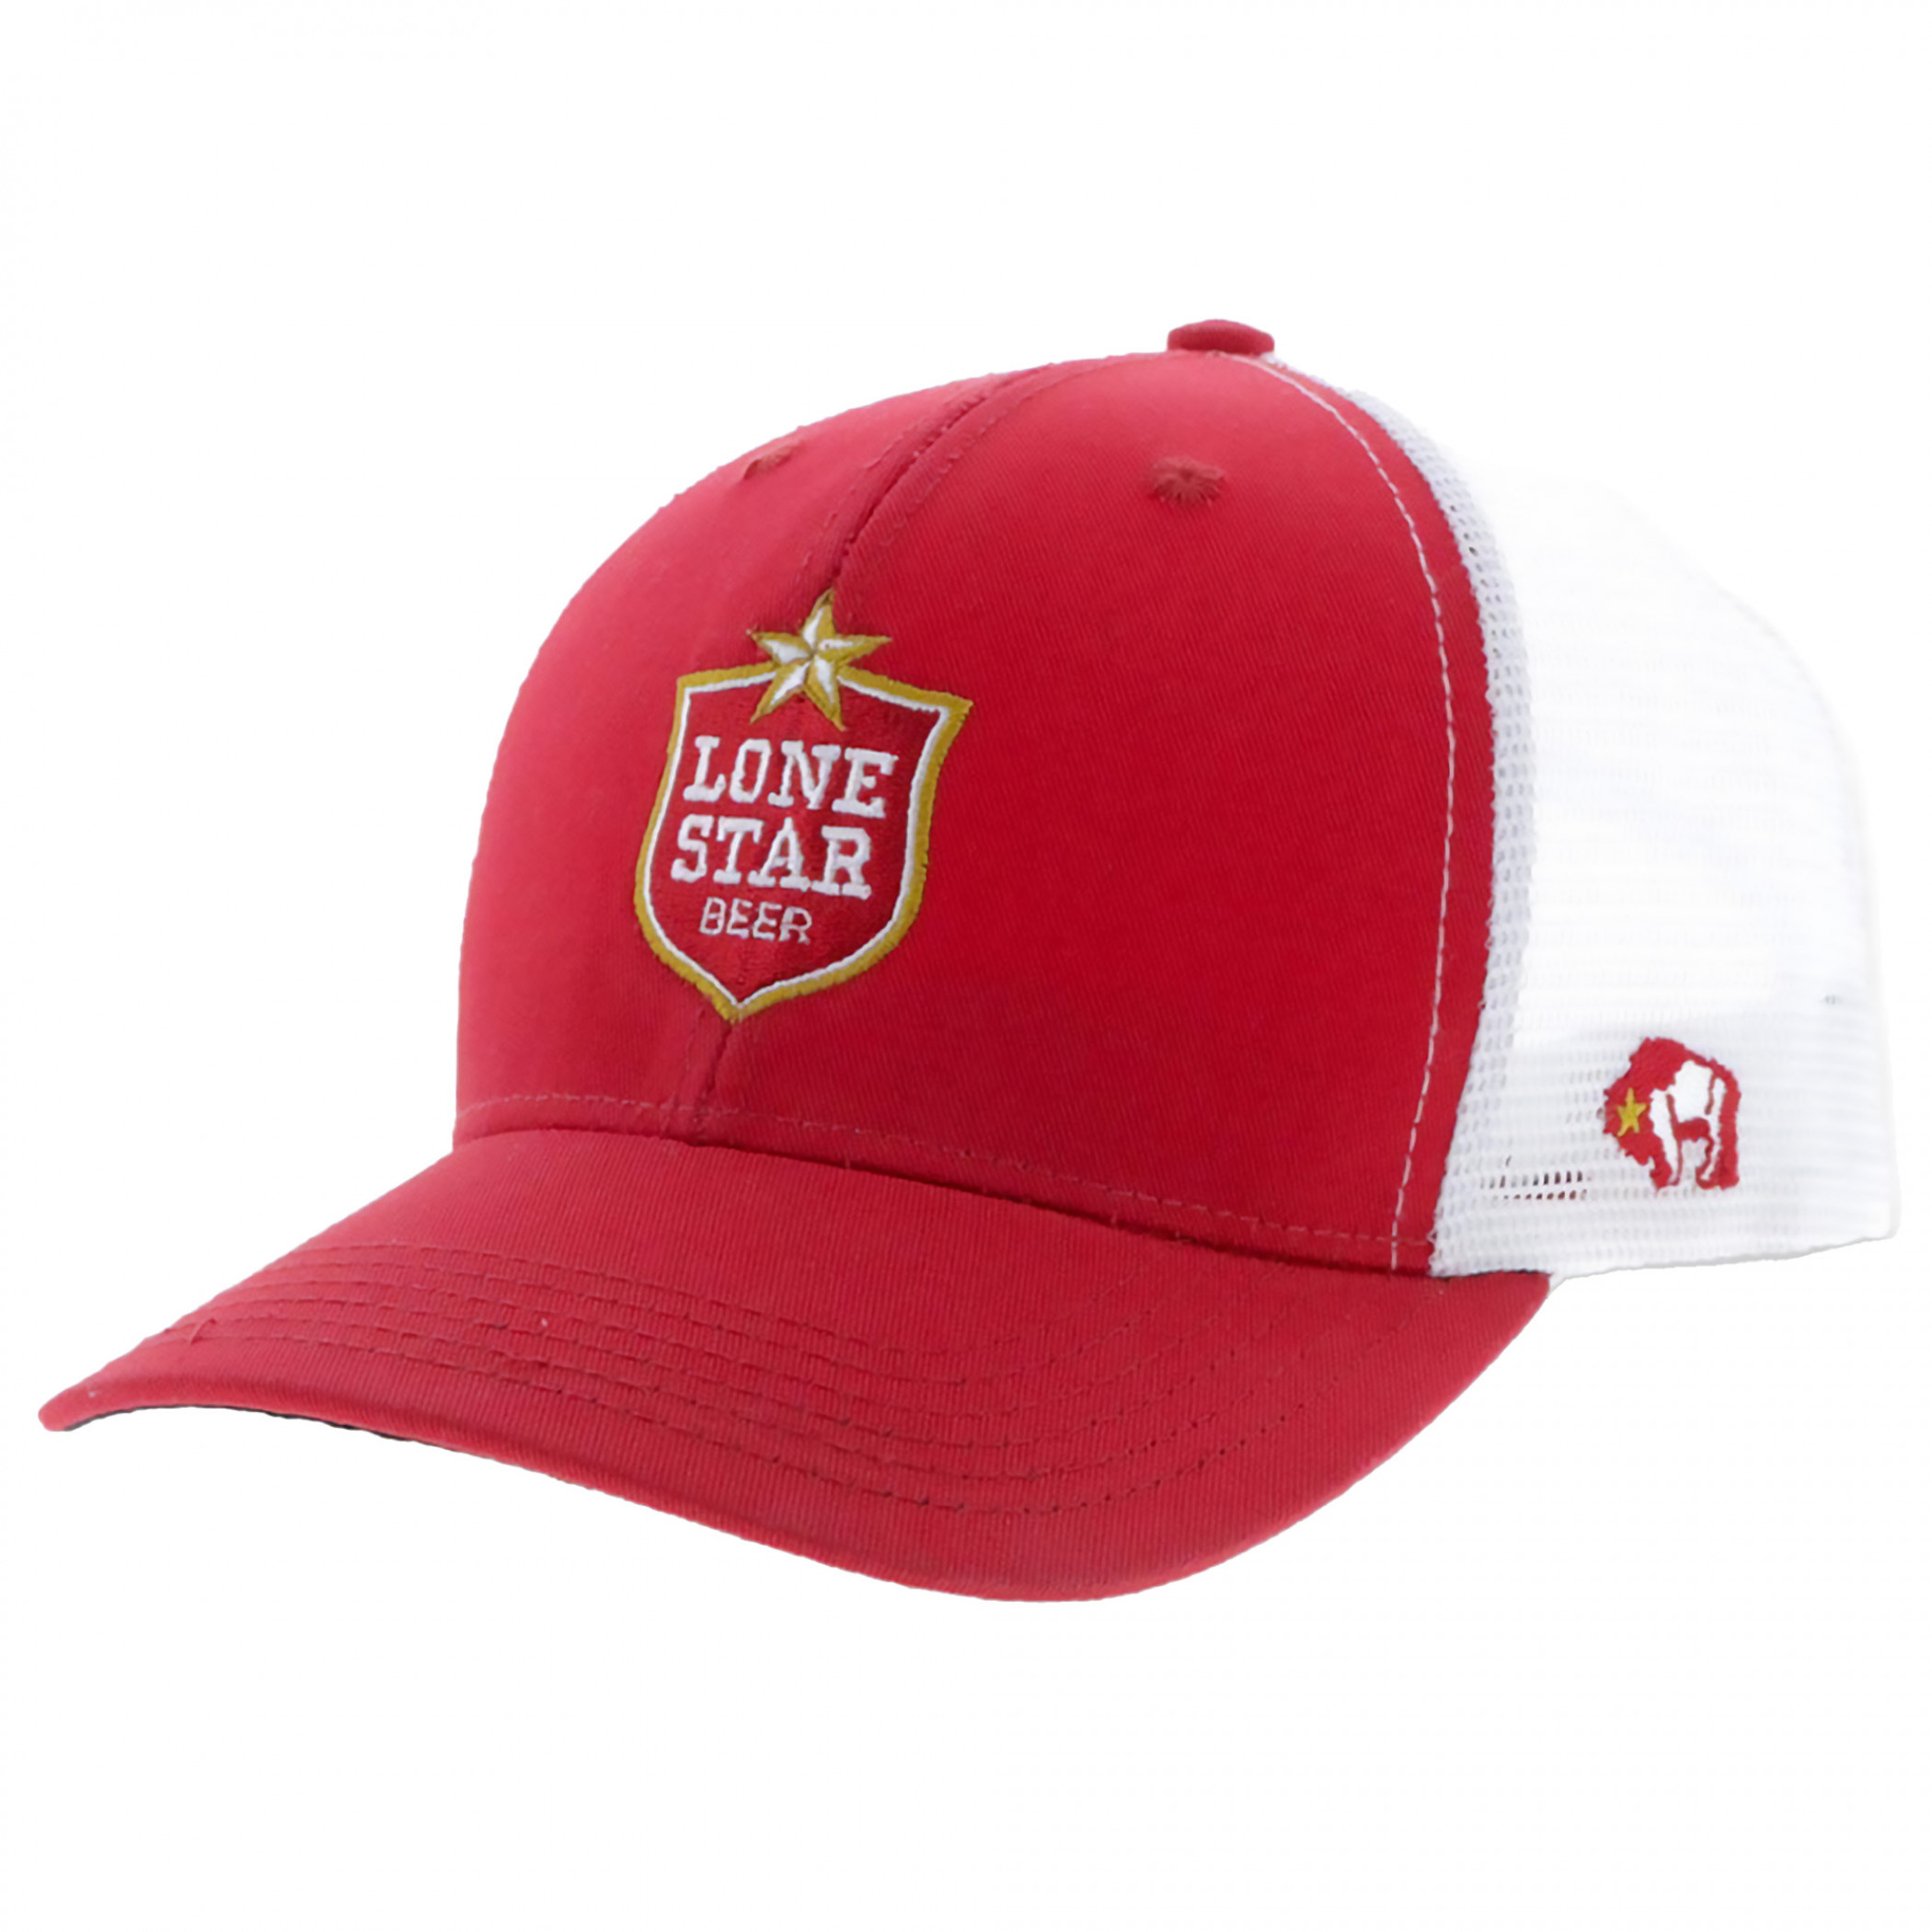 Lone Star Beer Embroidered Logo Curved Bill Snapback Hat